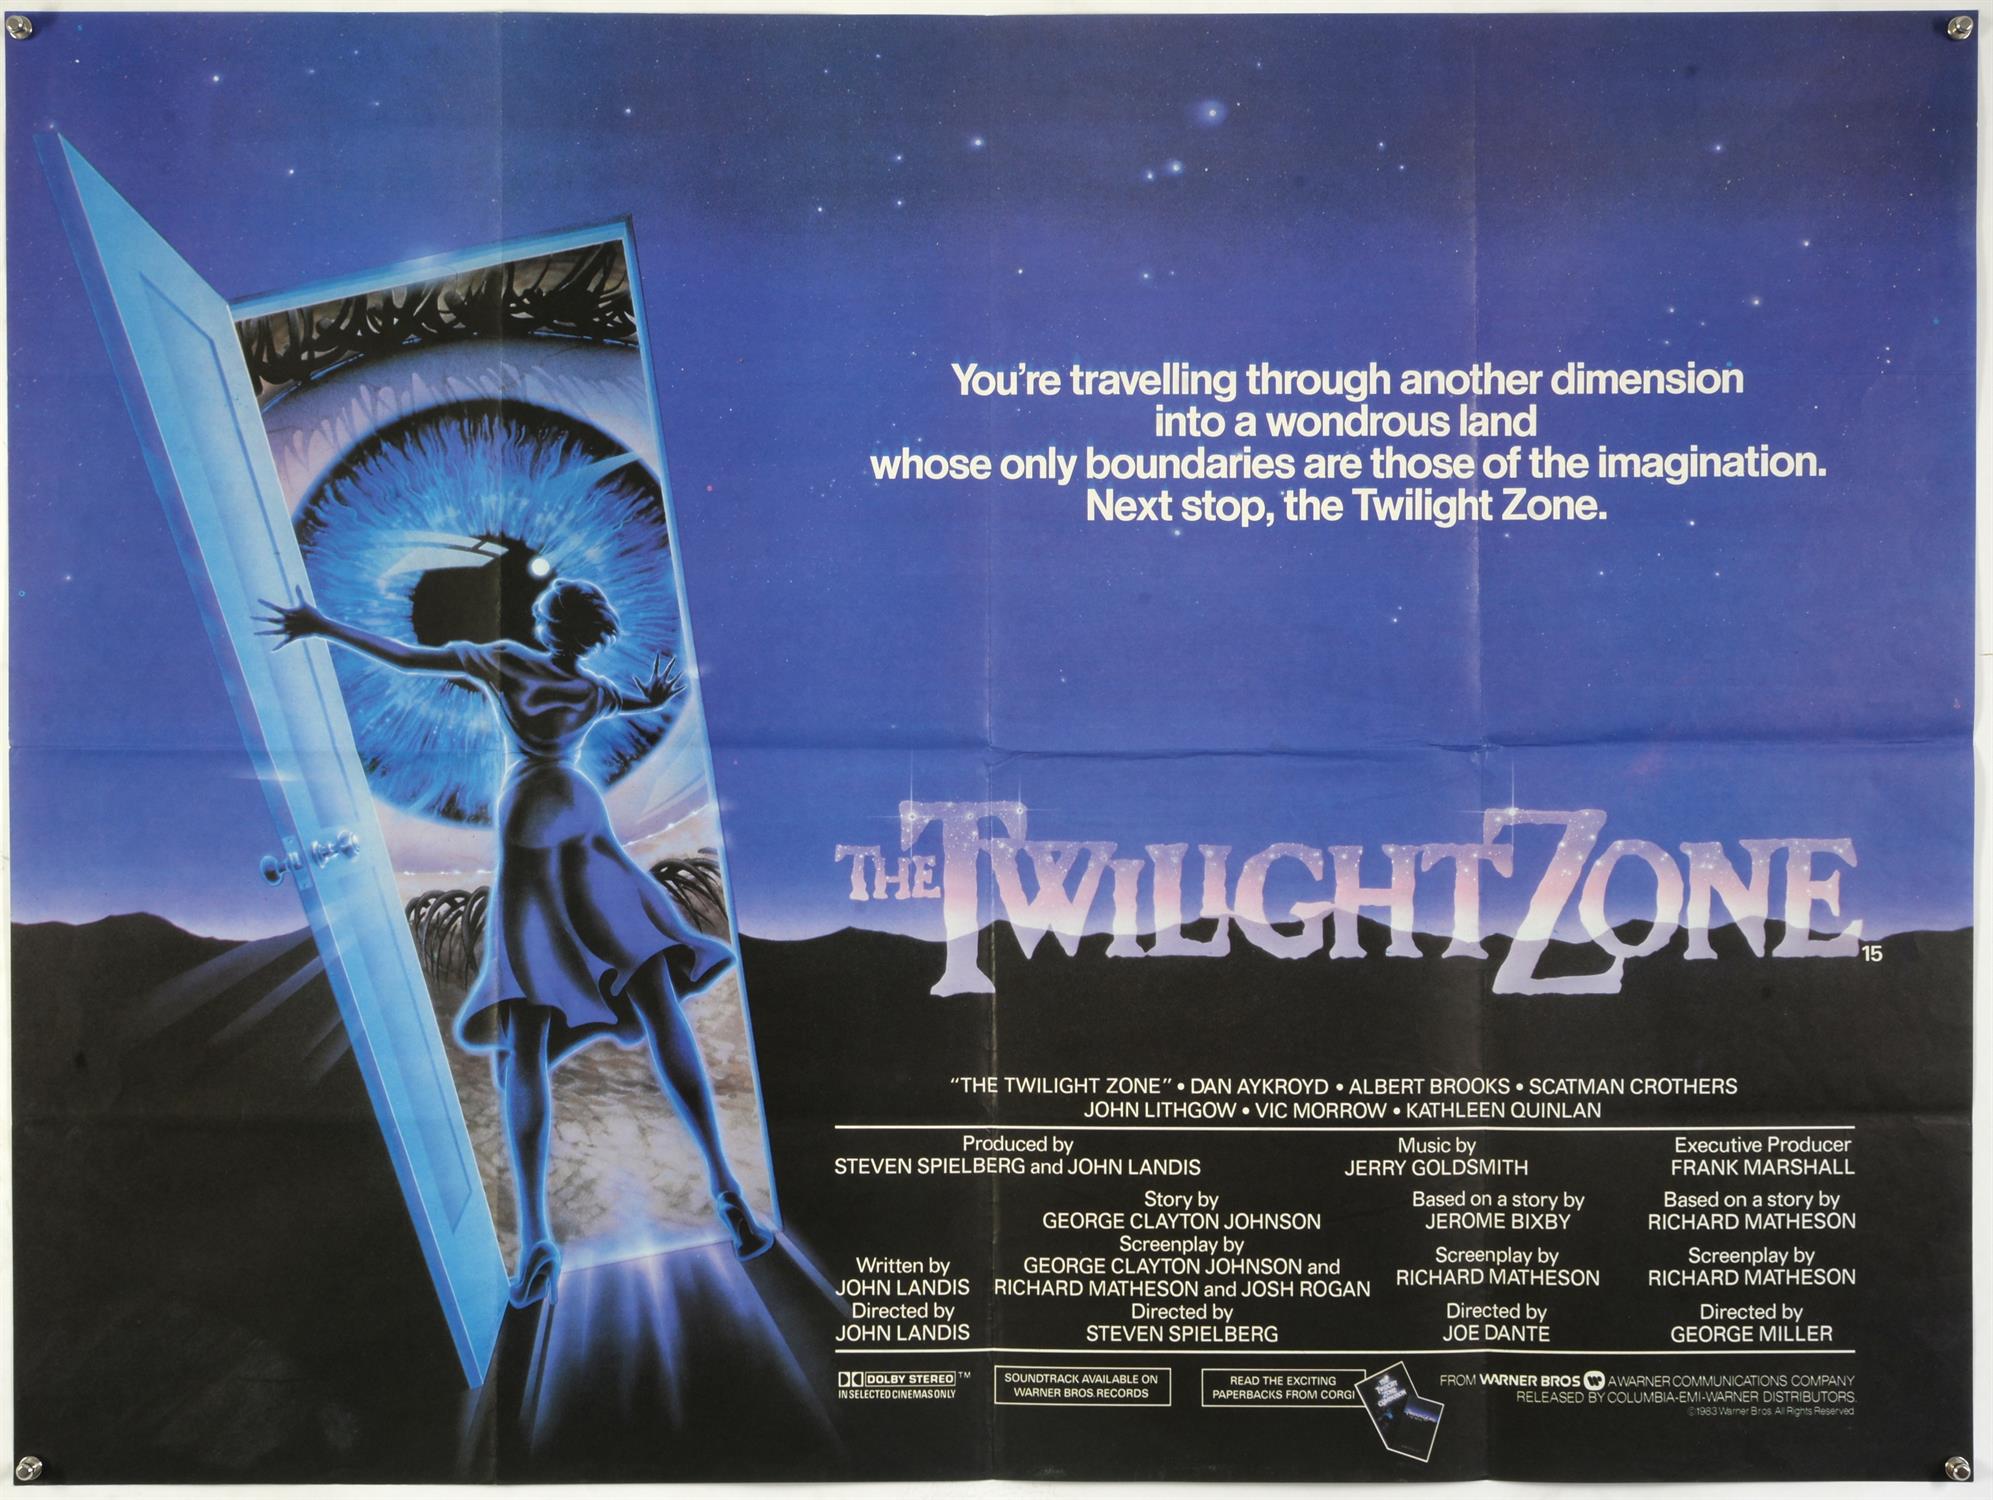 Twilight Zone (1983) British Quad Main and Teaser film posters, folded, 30 x 40 inches (2). - Image 2 of 2